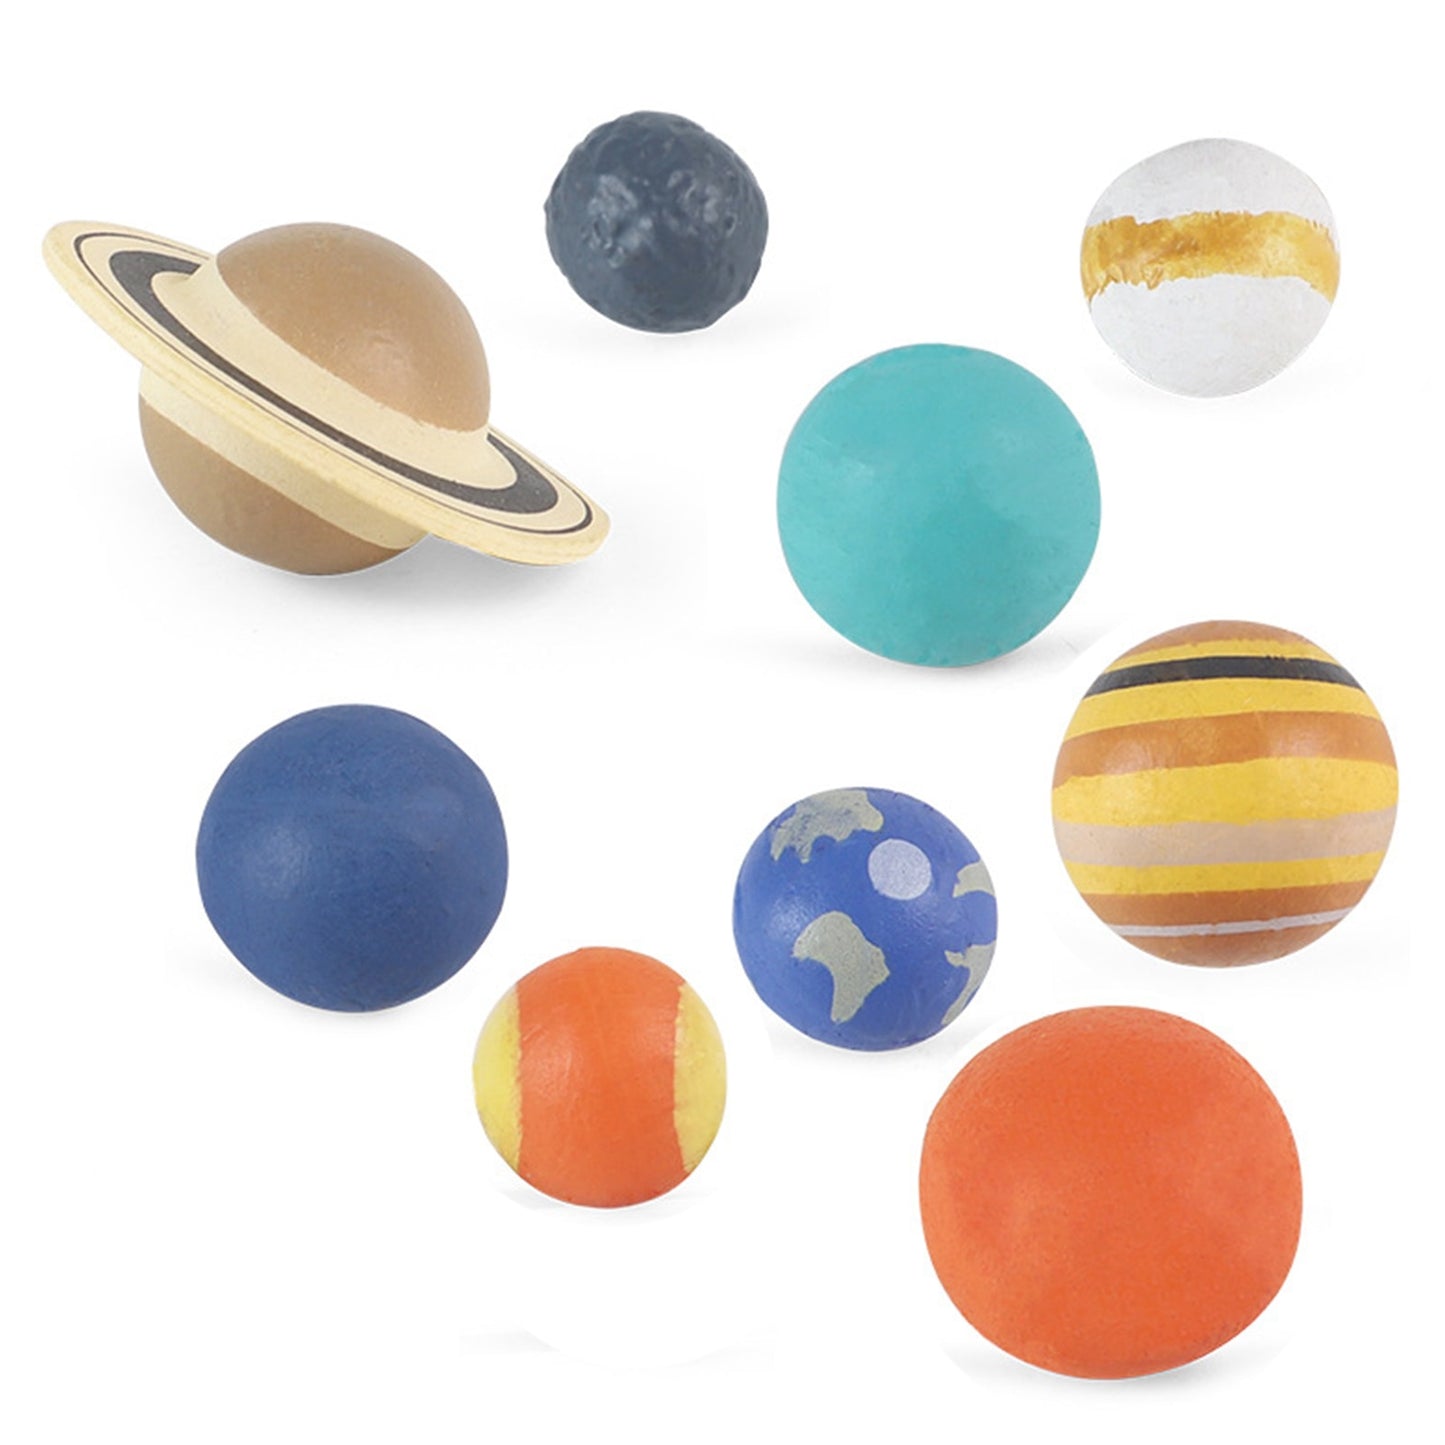 Scale Model Solar System: Planets and Sun (Set of 9)